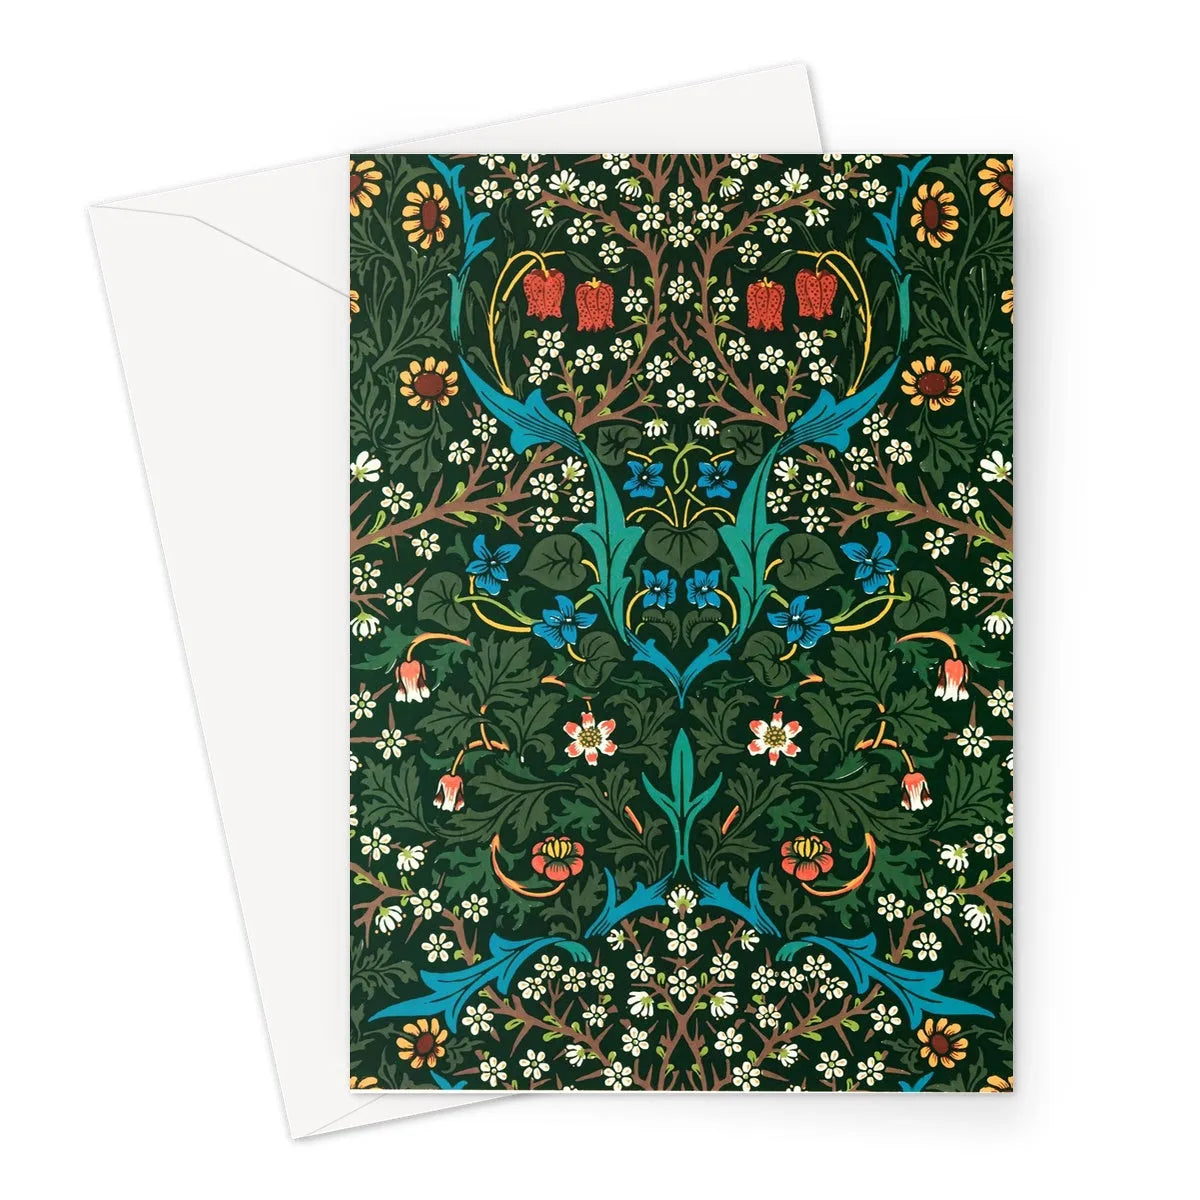 Blackthorn Hawthorn By William Morris Greeting Card - A5 Portrait / 1 Card - Greeting & Note Cards - Aesthetic Art